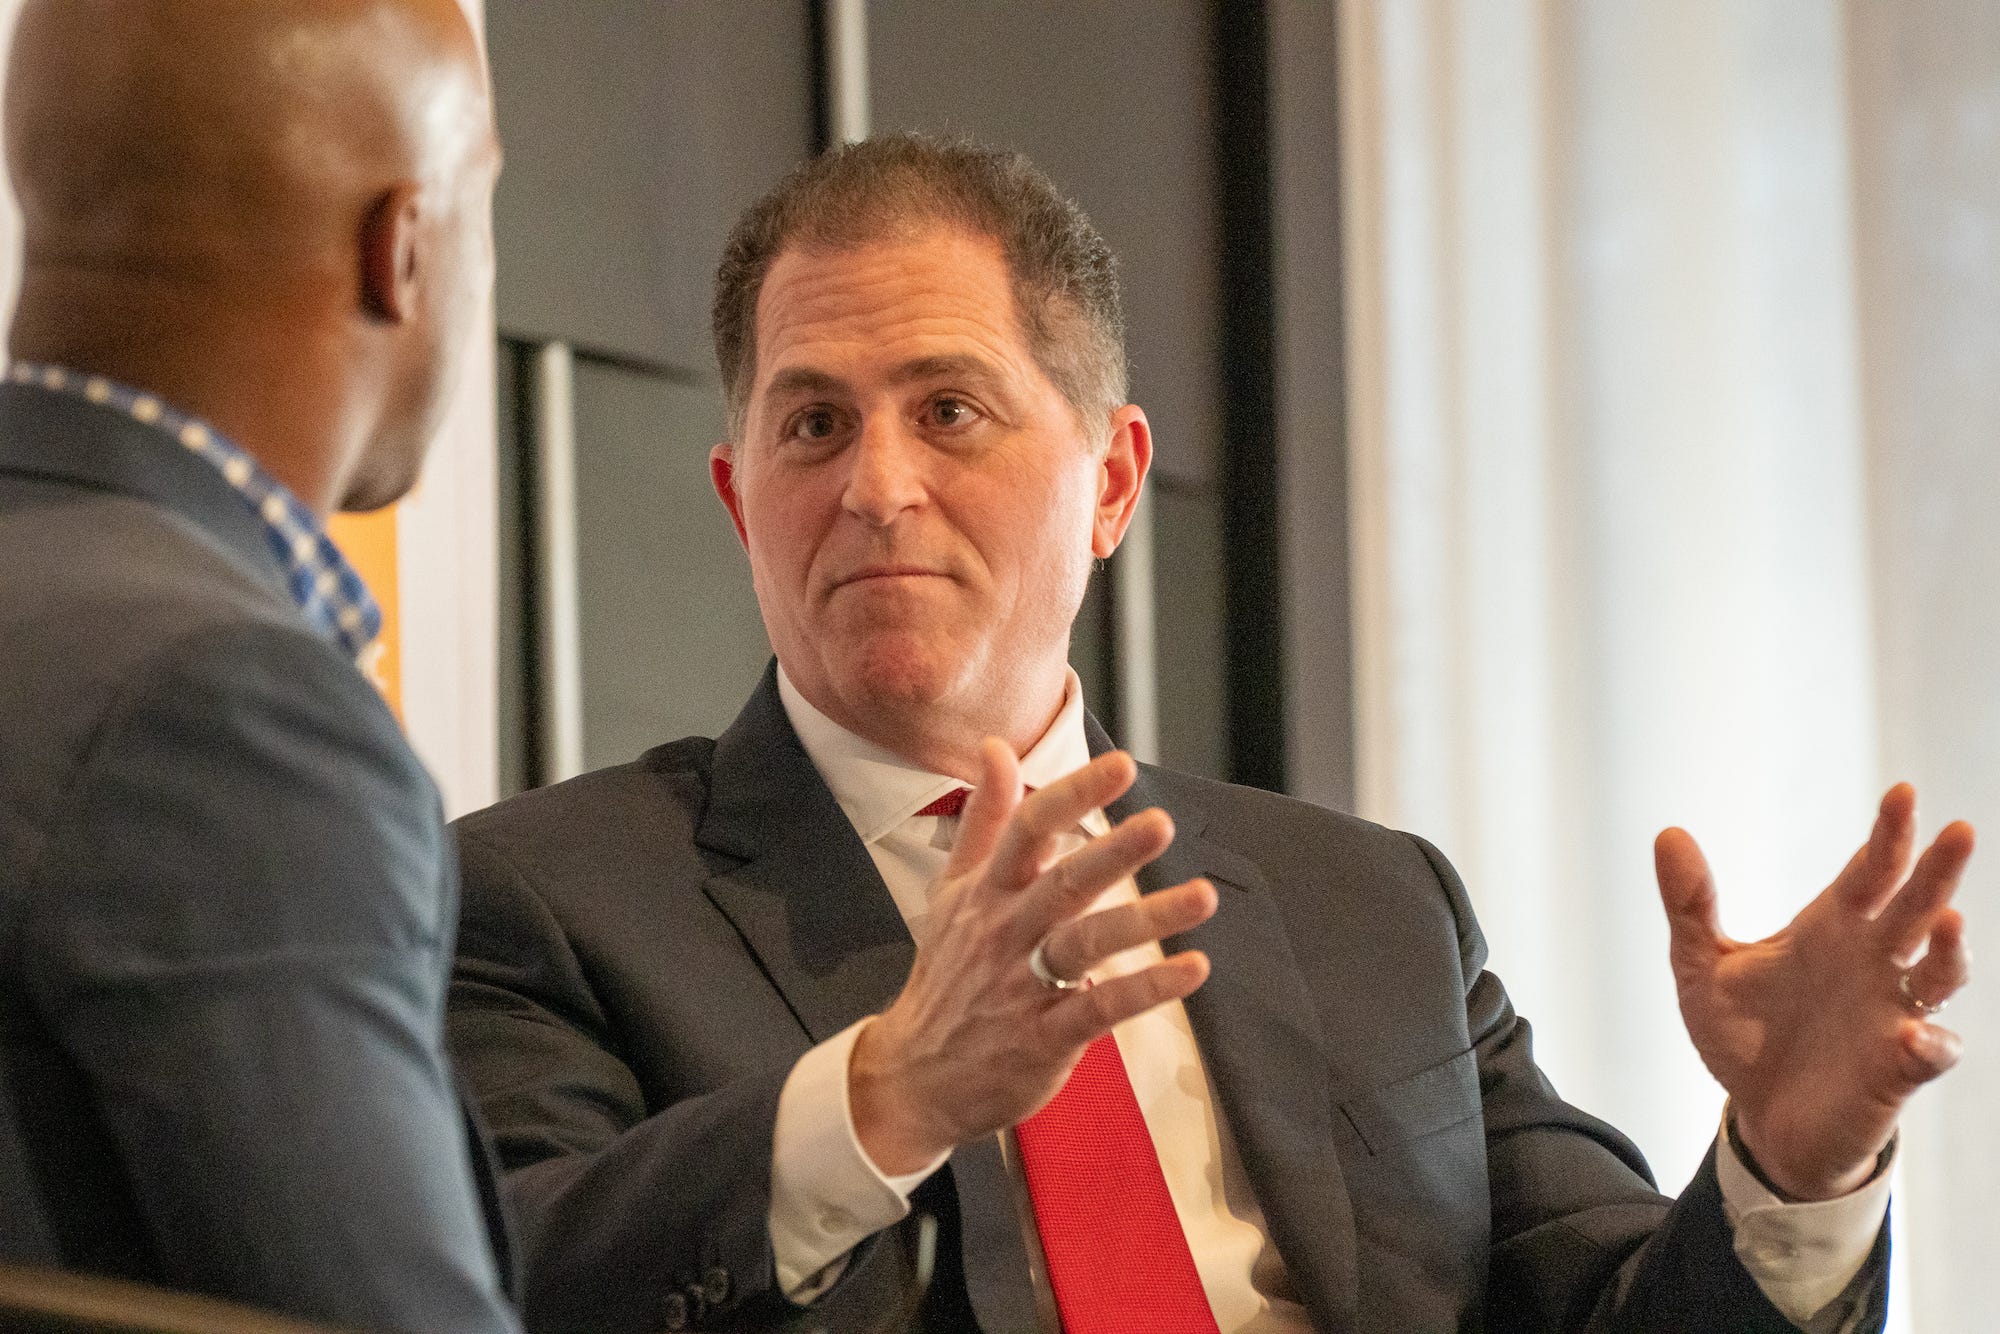 Michael Dell, Dell's founder and CEO